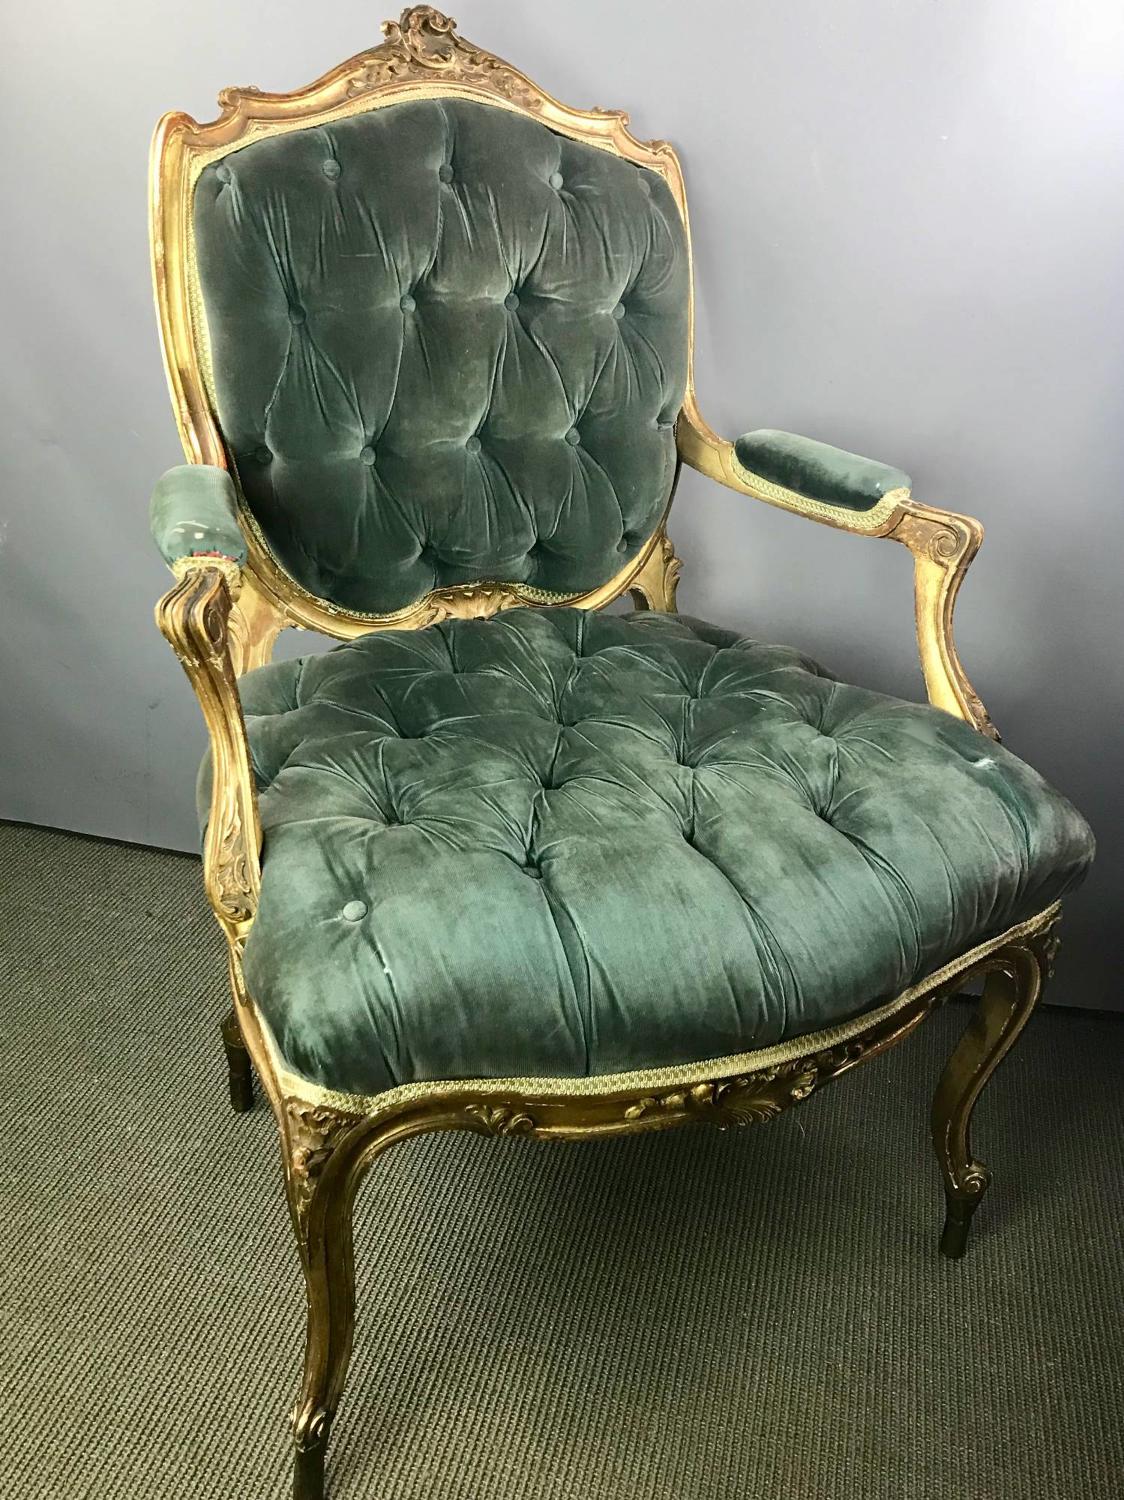 Antique Giltwood Fauteuil in Louis XVI Style